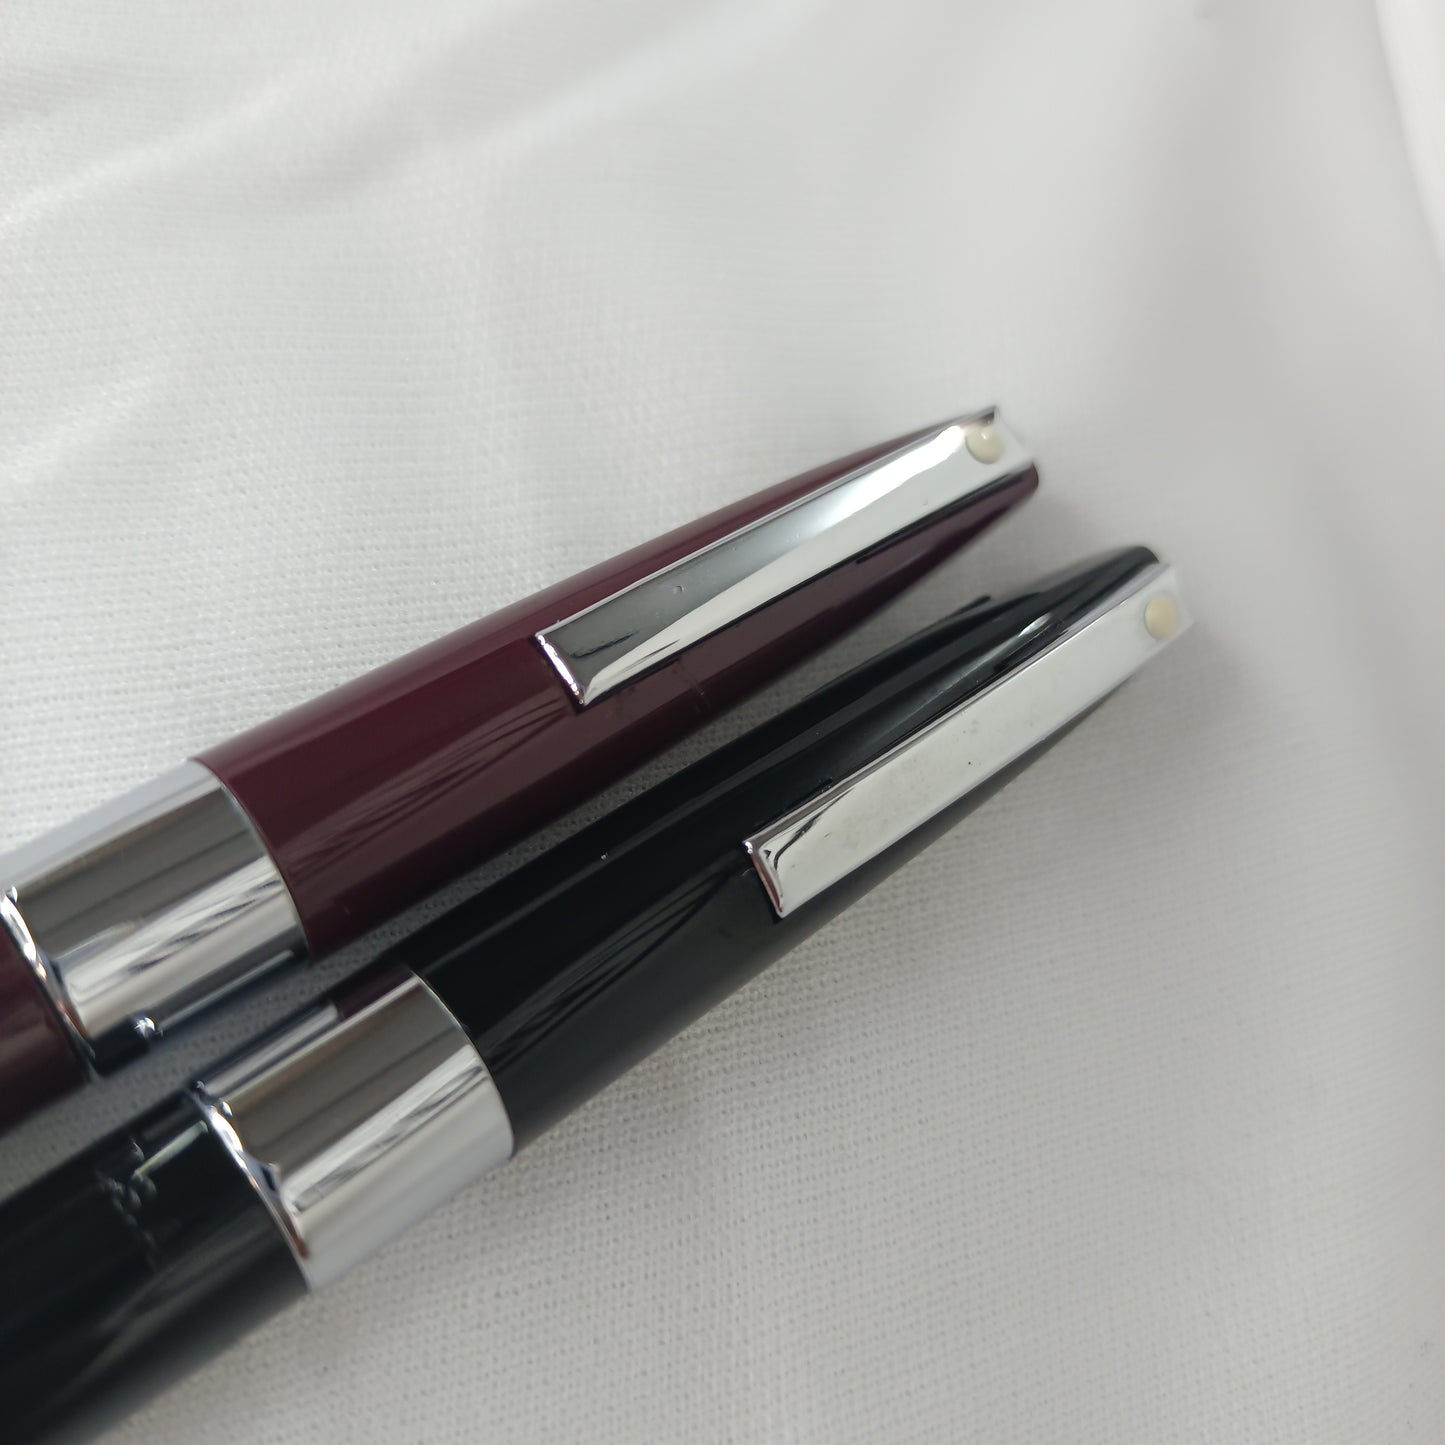 2 PC Sheaffer Imperial Burgundy And Black Ball Pen Made In USA